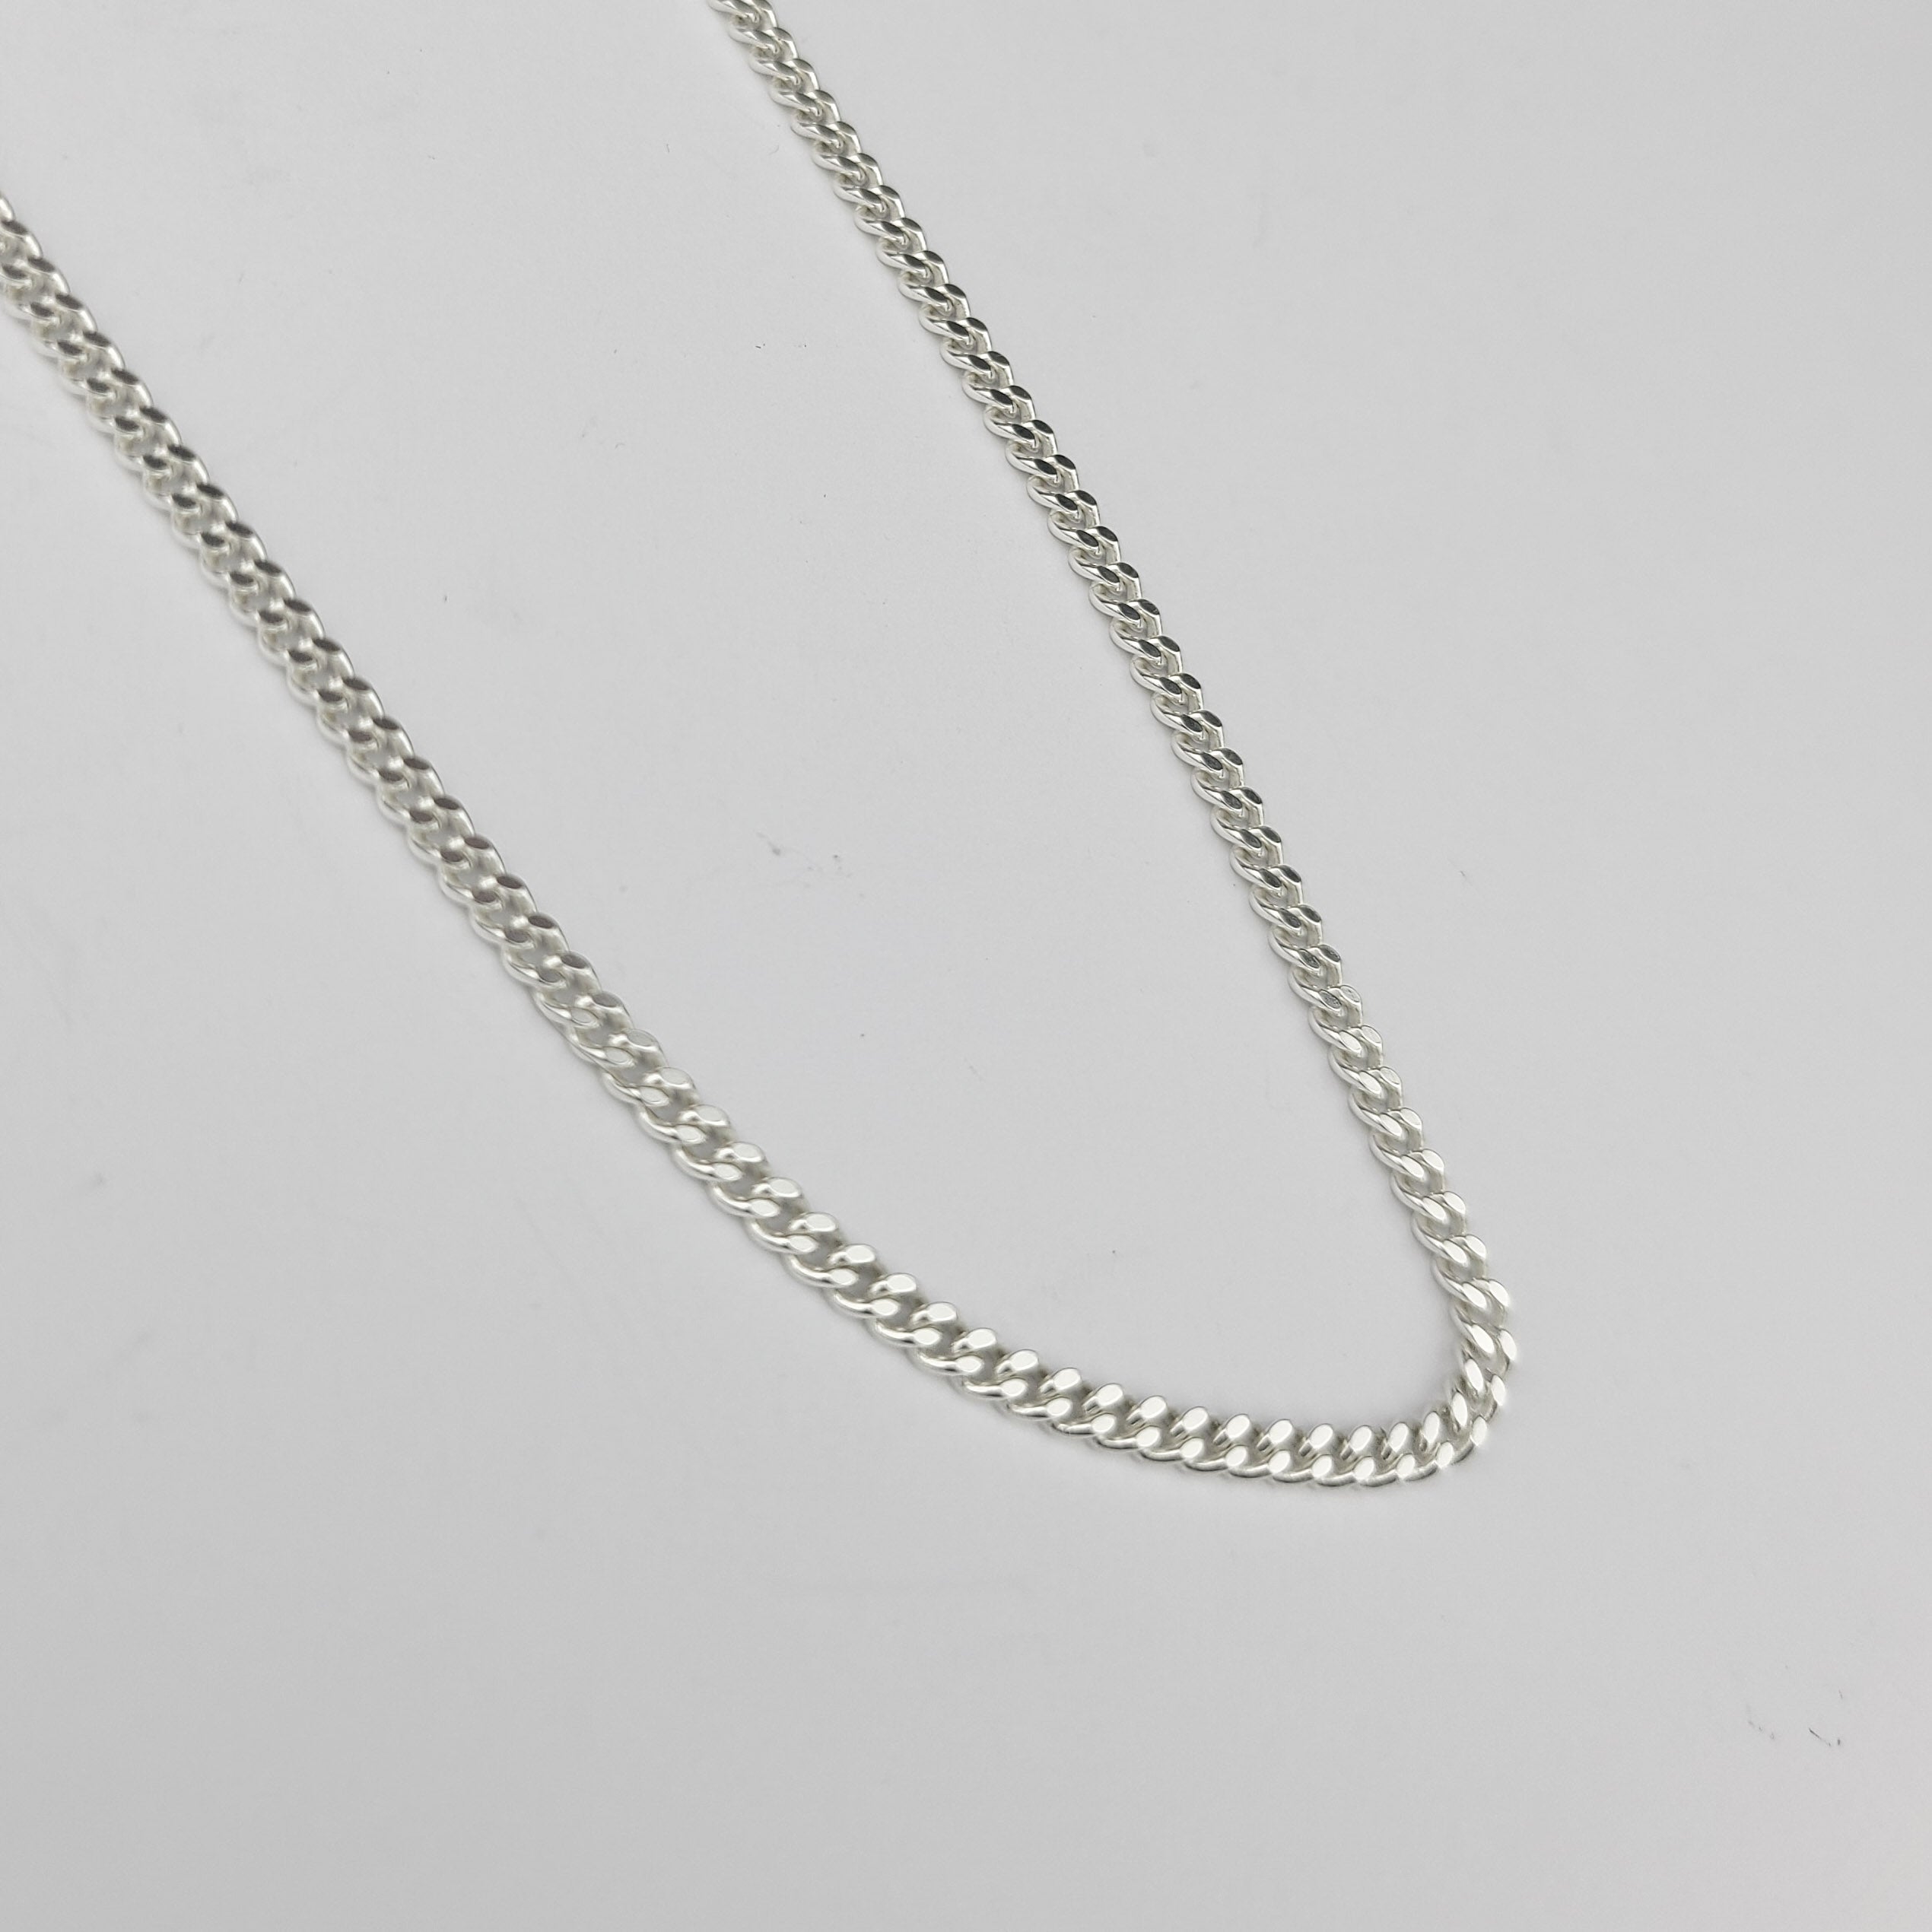 Bulky Thin 2.8mm Sterling Silver Chain Necklace